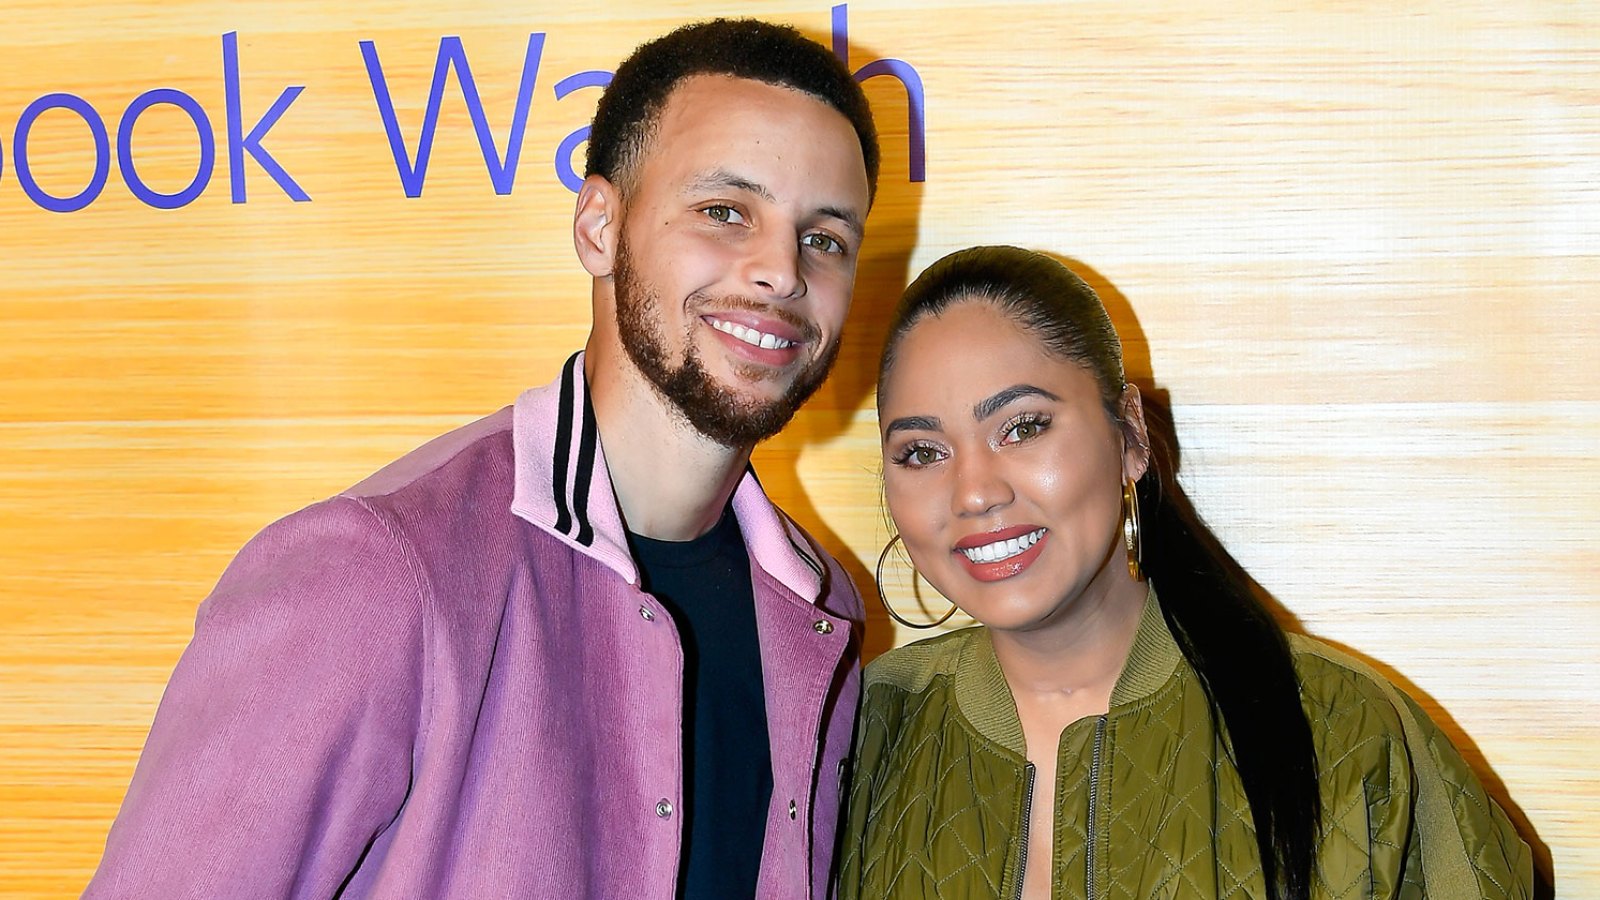 Stephen Curry and Wife Ayesha Celebrate 11th Wedding Anniversary